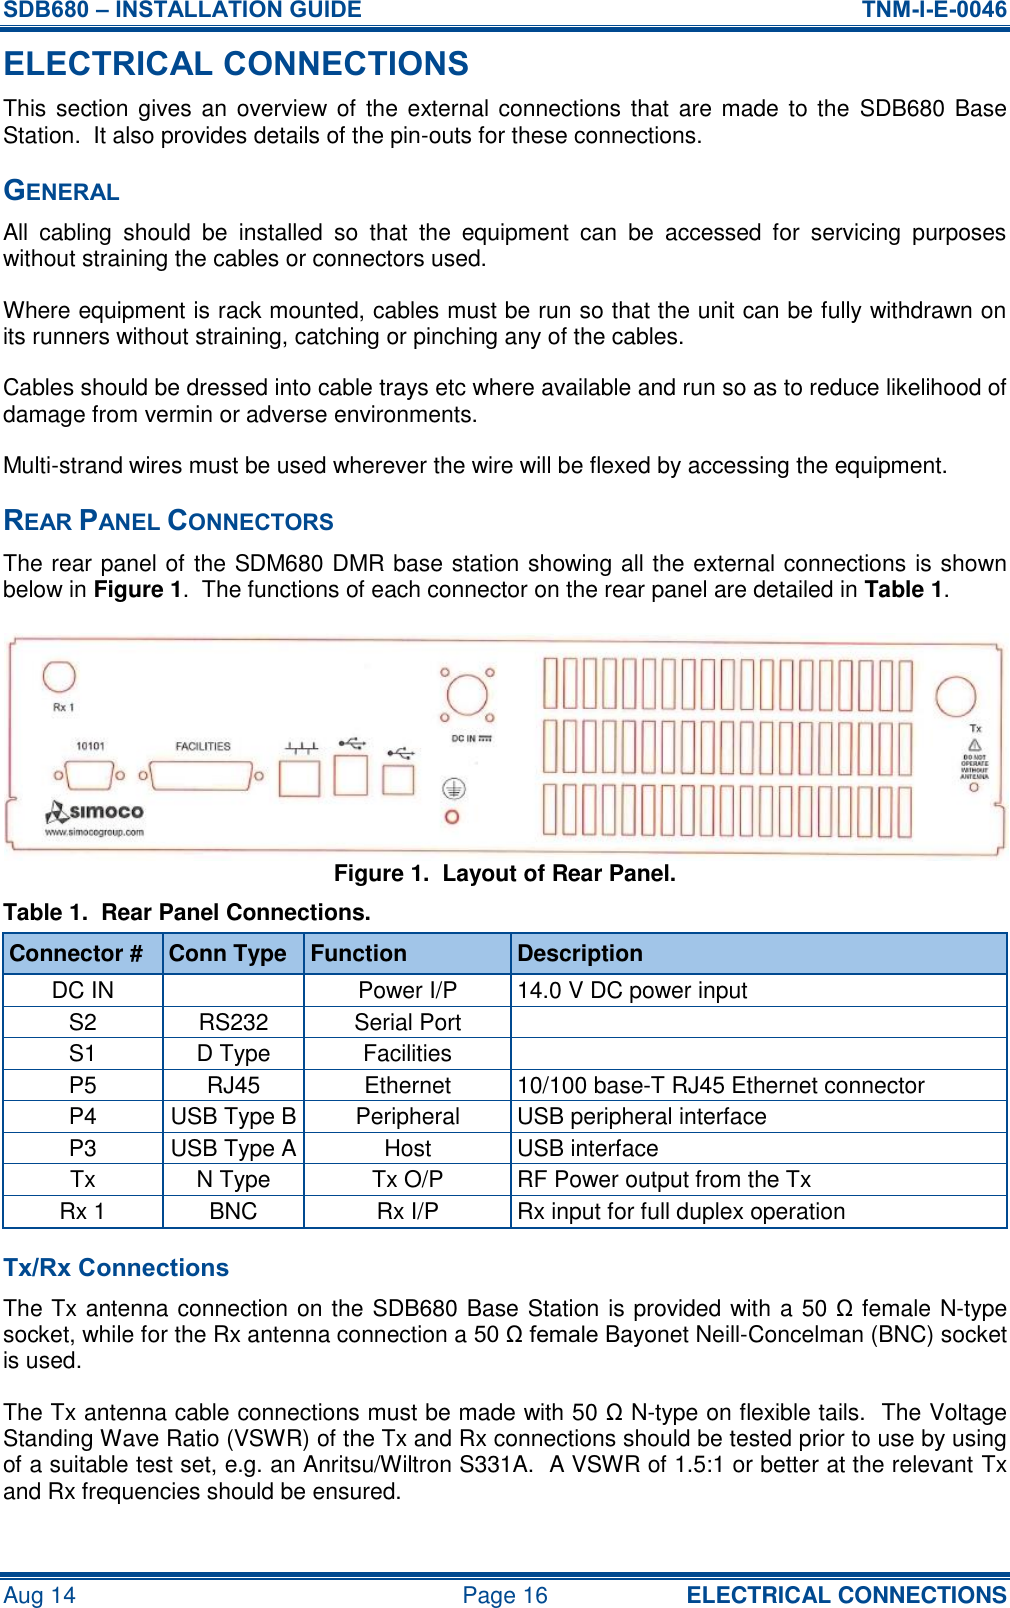 SDB680 – INSTALLATION GUIDE  TNM-I-E-0046 Aug 14  Page 16 ELECTRICAL CONNECTIONS ELECTRICAL CONNECTIONS This section gives an  overview of  the  external connections that are  made to the  SDB680 Base Station.  It also provides details of the pin-outs for these connections. GENERAL All  cabling  should  be  installed  so  that  the  equipment  can  be  accessed  for  servicing  purposes without straining the cables or connectors used. Where equipment is rack mounted, cables must be run so that the unit can be fully withdrawn on its runners without straining, catching or pinching any of the cables. Cables should be dressed into cable trays etc where available and run so as to reduce likelihood of damage from vermin or adverse environments. Multi-strand wires must be used wherever the wire will be flexed by accessing the equipment. REAR PANEL CONNECTORS The rear panel of the SDM680 DMR base station showing all the external connections is shown below in Figure 1.  The functions of each connector on the rear panel are detailed in Table 1. Figure 1.  Layout of Rear Panel. Table 1.  Rear Panel Connections. Connector # Conn Type Function Description DC IN  Power I/P 14.0 V DC power input S2 RS232 Serial Port  S1 D Type Facilities  P5 RJ45 Ethernet 10/100 base-T RJ45 Ethernet connector P4 USB Type B Peripheral USB peripheral interface P3 USB Type A Host USB interface Tx N Type Tx O/P RF Power output from the Tx Rx 1 BNC Rx I/P Rx input for full duplex operation Tx/Rx Connections The Tx antenna connection on the SDB680 Base Station is provided with a 50 Ω female N-type socket, while for the Rx antenna connection a 50 Ω female Bayonet Neill-Concelman (BNC) socket is used. The Tx antenna cable connections must be made with 50 Ω N-type on flexible tails.  The Voltage Standing Wave Ratio (VSWR) of the Tx and Rx connections should be tested prior to use by using of a suitable test set, e.g. an Anritsu/Wiltron S331A.  A VSWR of 1.5:1 or better at the relevant Tx and Rx frequencies should be ensured. 